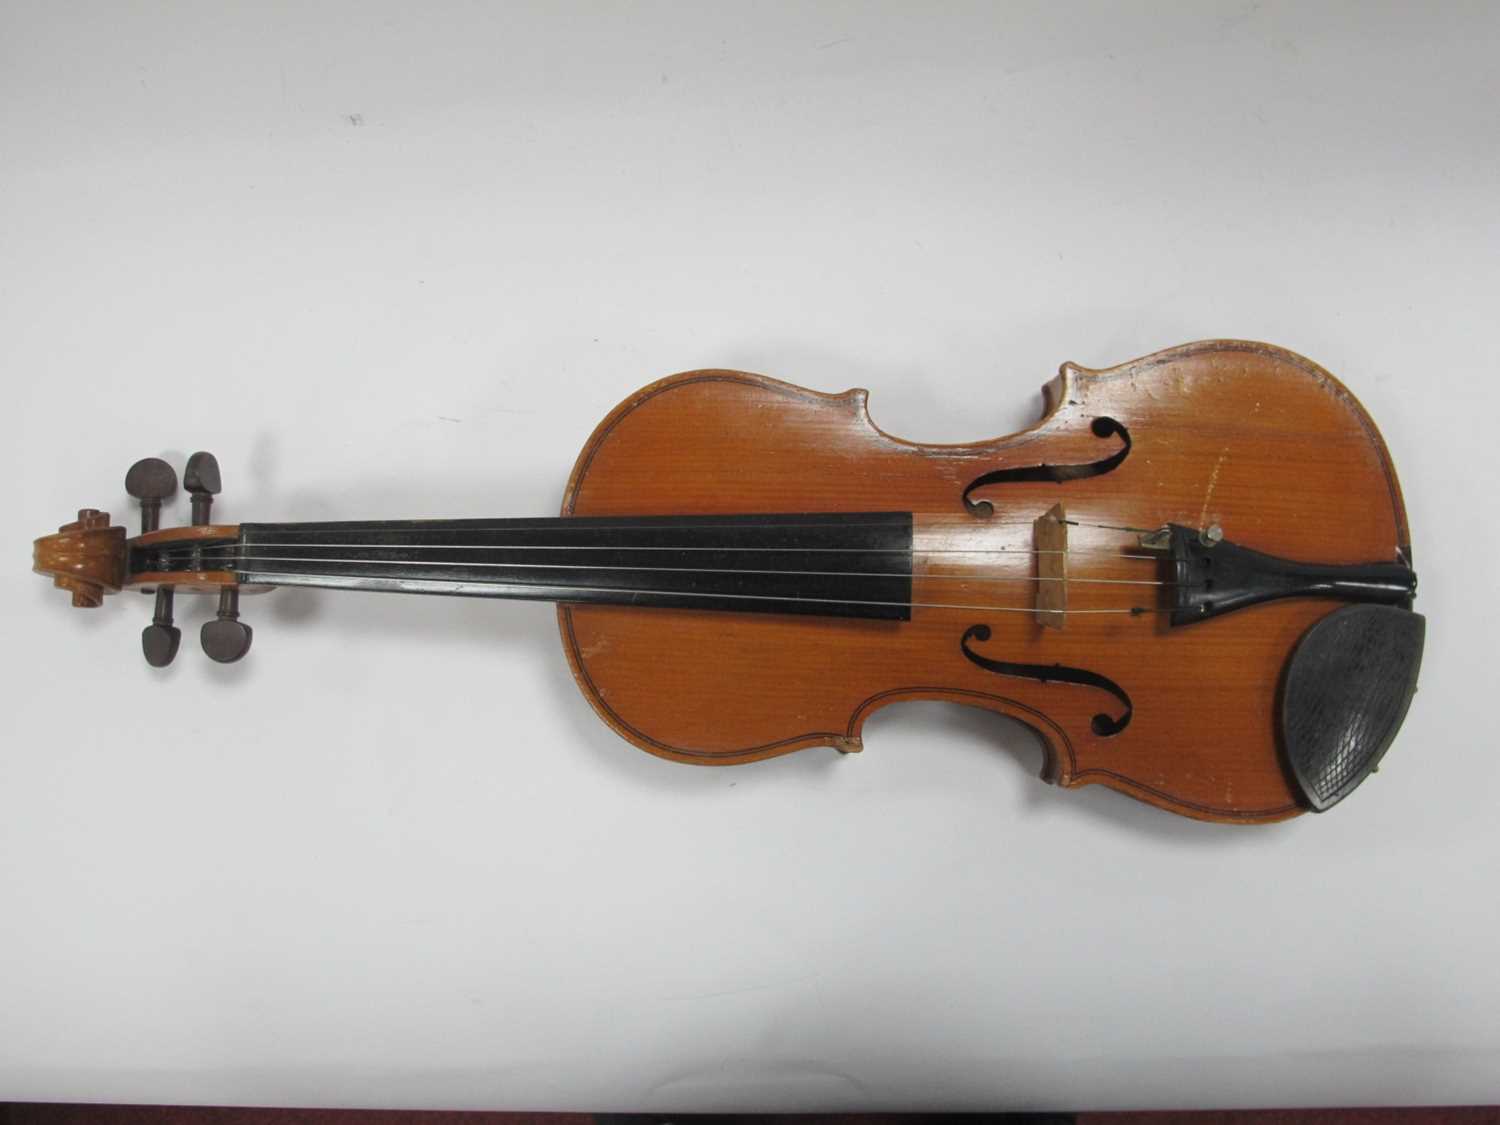 Violin, with two piece back, overall length 51.5cm, length of back 31cm, with bow and case. - Image 17 of 18